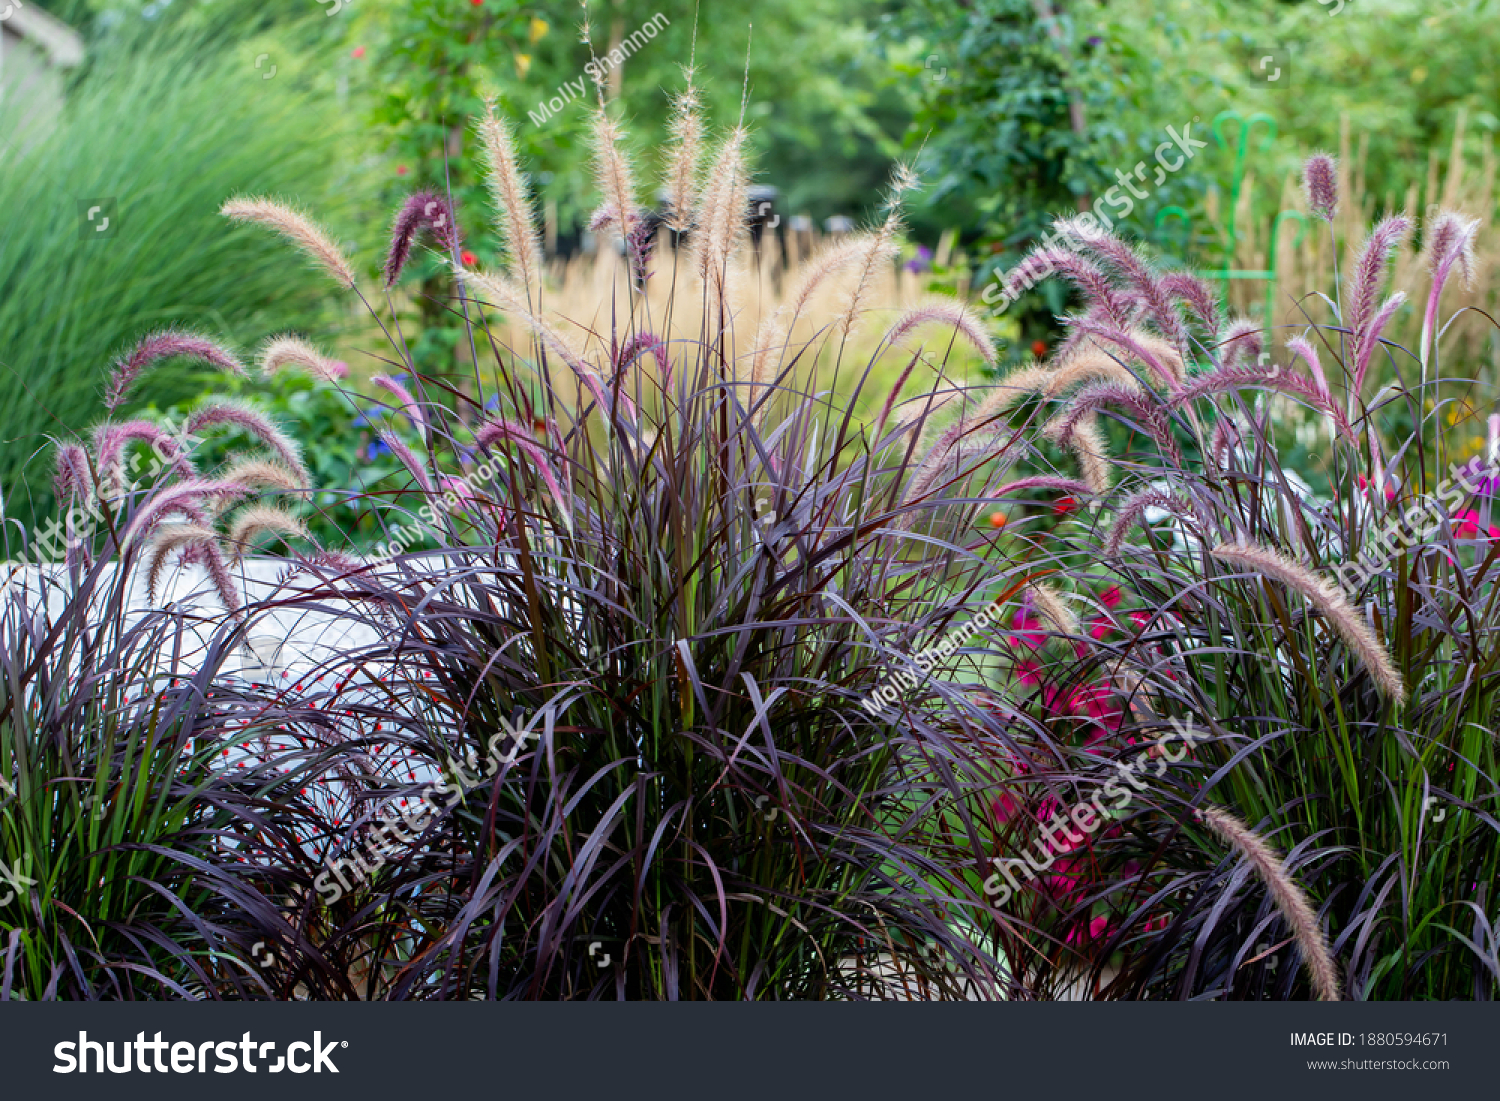 Shimmery Purple Ornamental fountain grass gracefully waving in the late afternoon  #1880594671